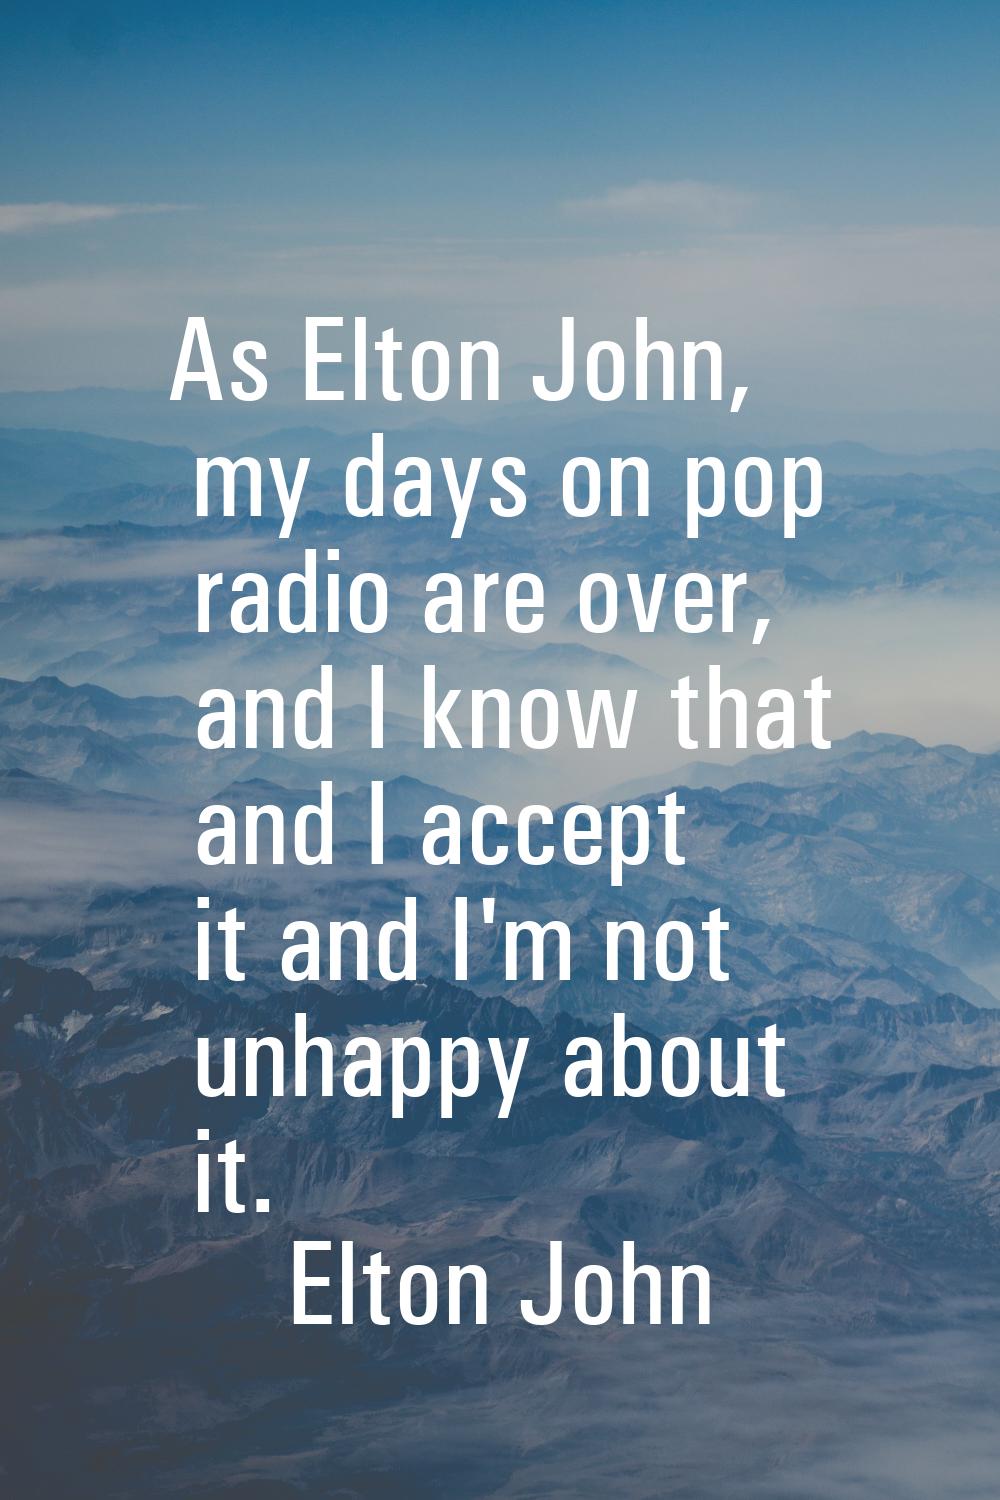 As Elton John, my days on pop radio are over, and I know that and I accept it and I'm not unhappy a